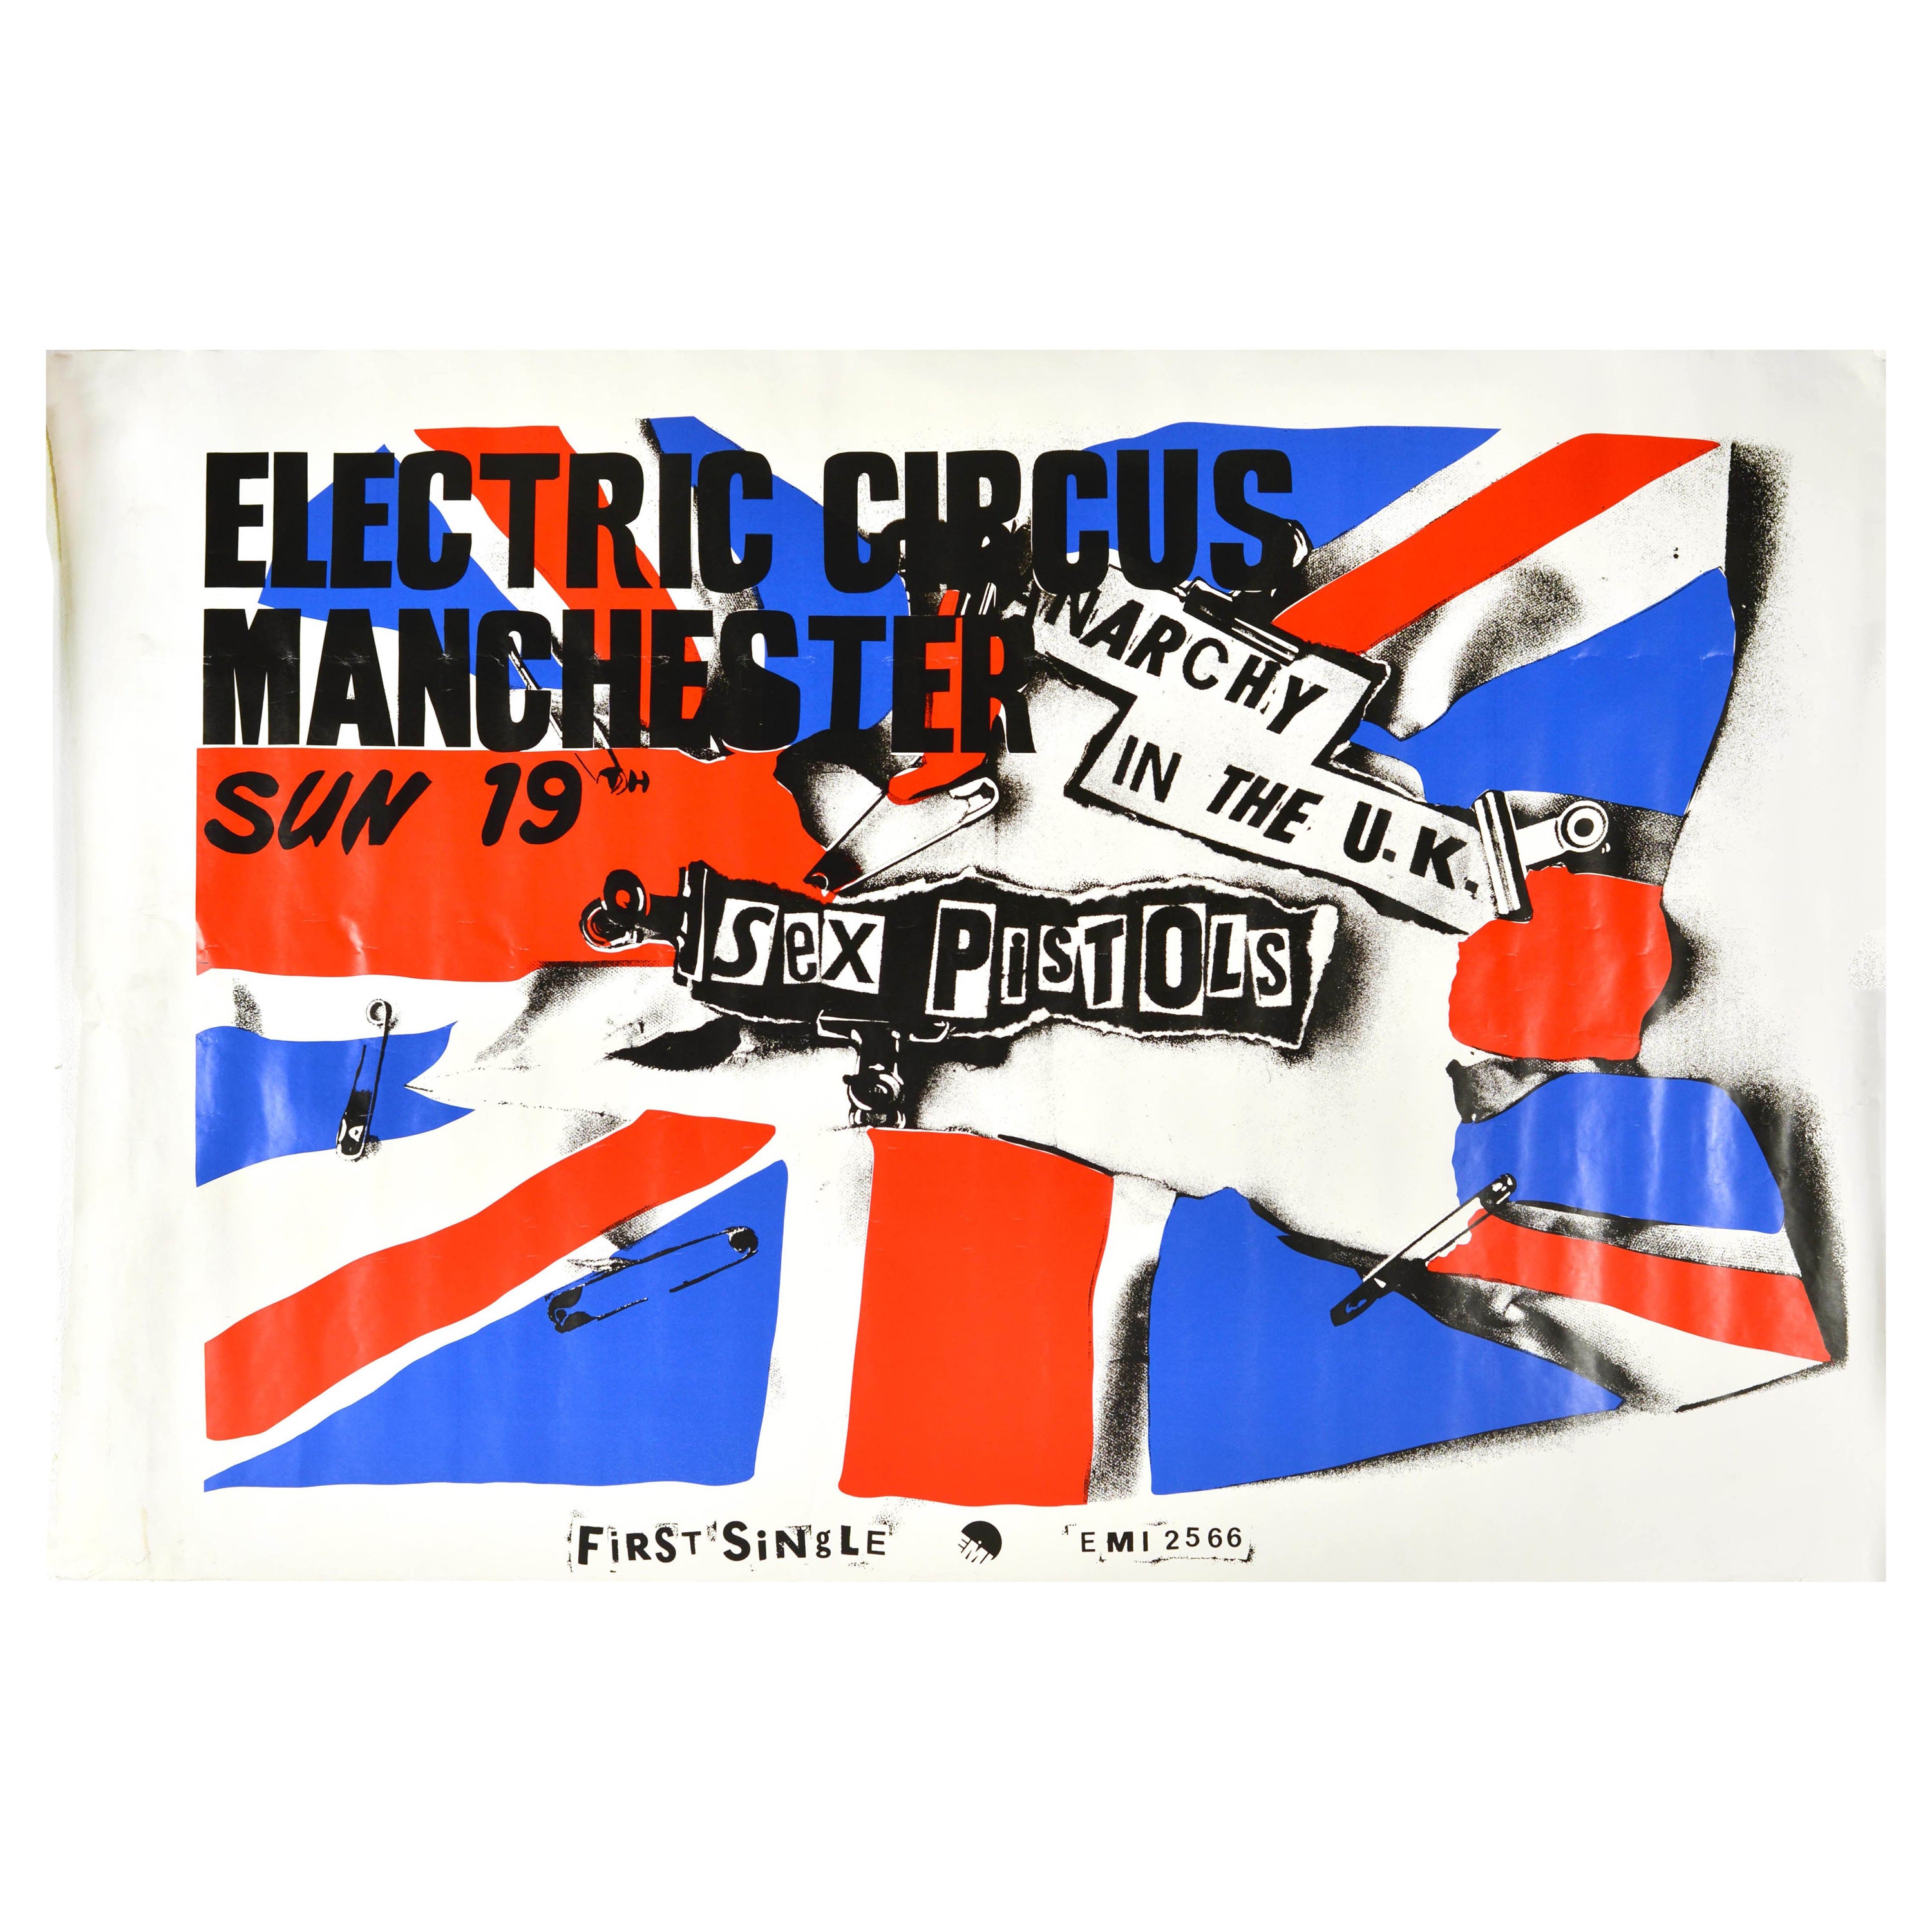 Original Vintage Music Concert Advertising Poster Sex Pistols Anarchy in the UK For Sale